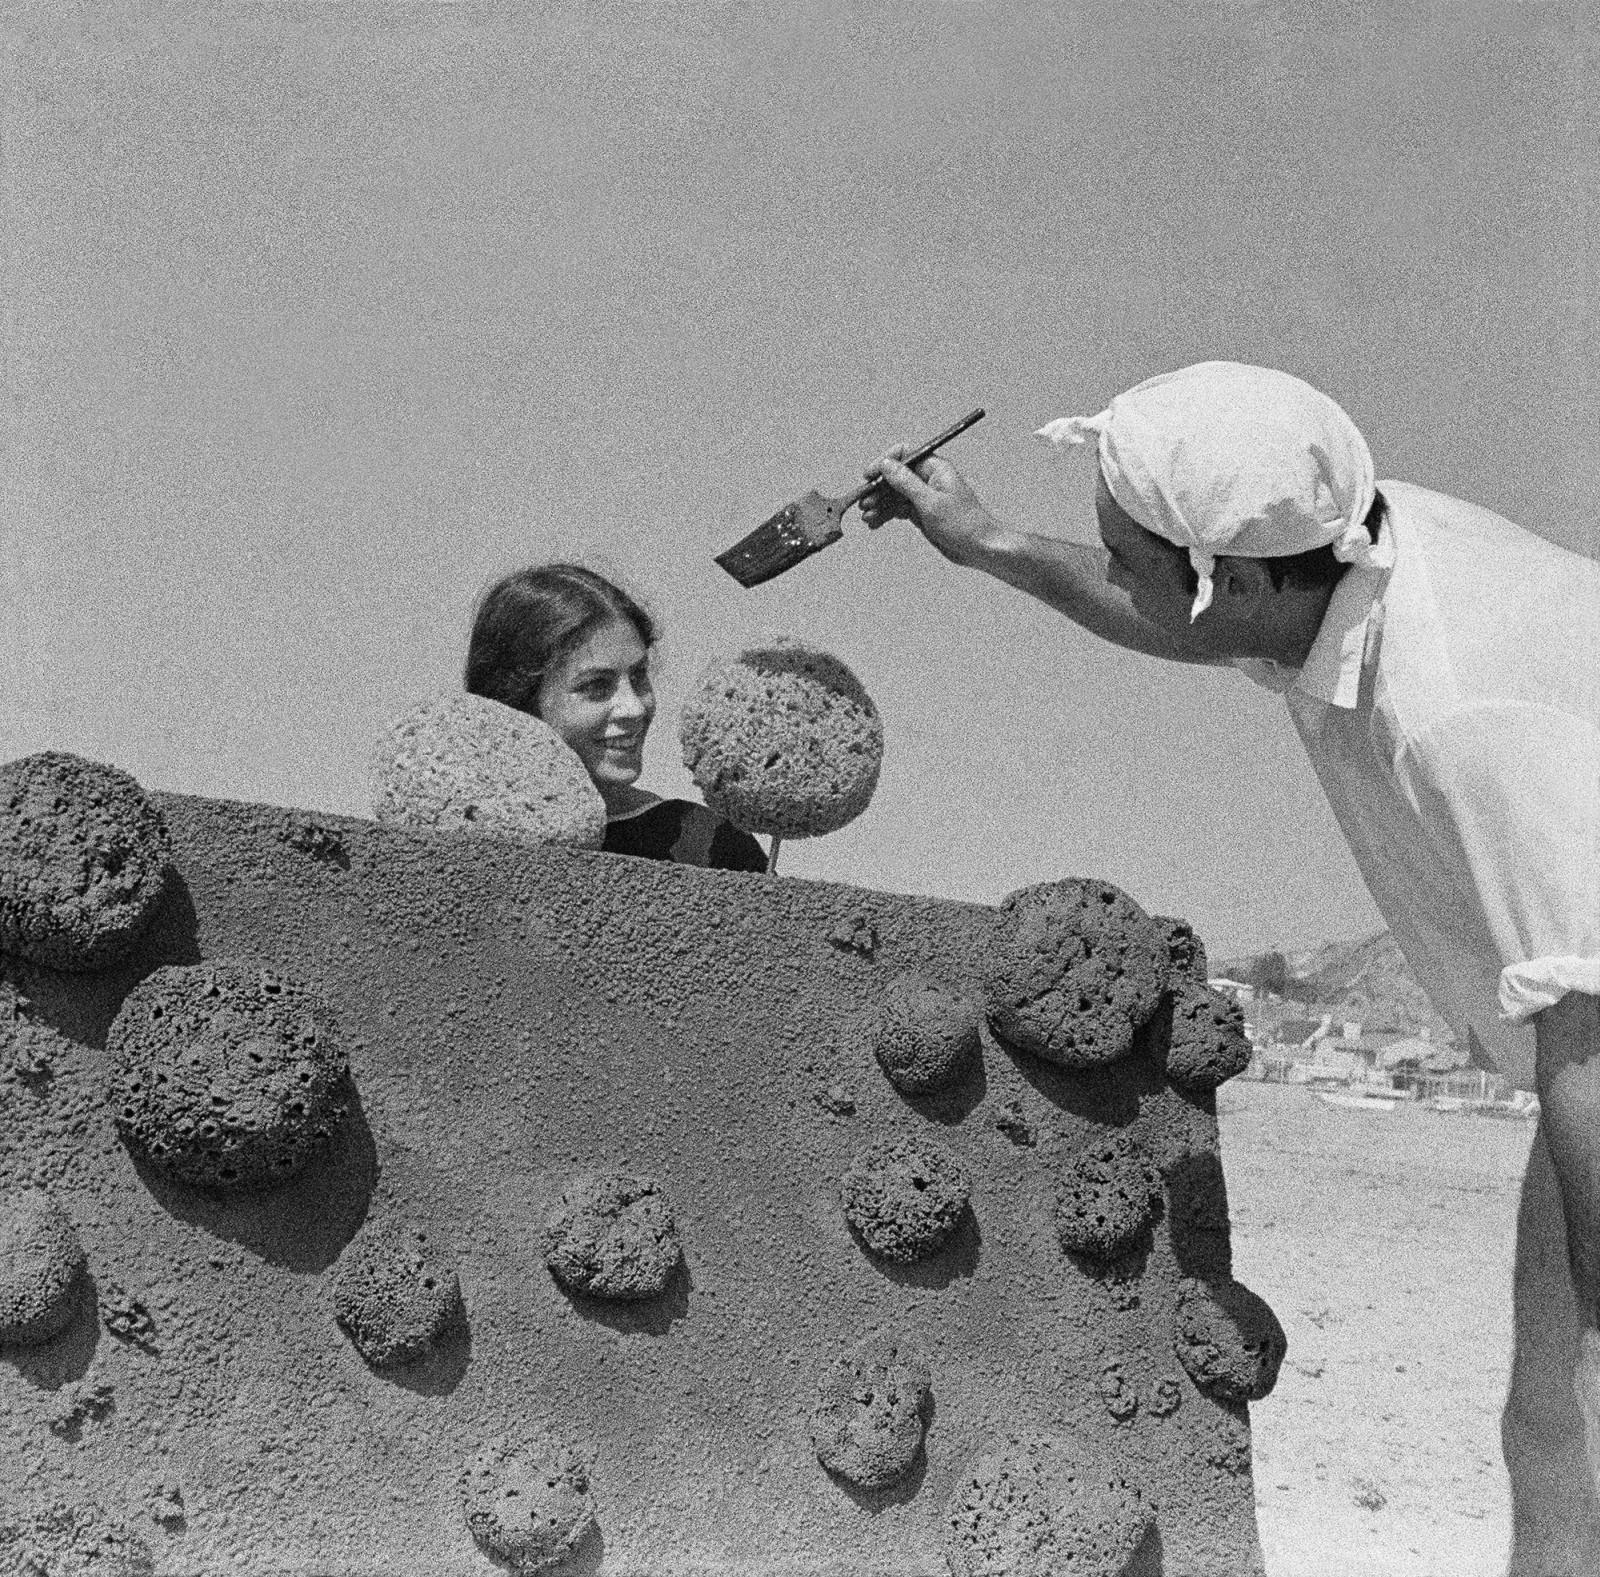 Yves Klein making a Sponge Relief on Malibu beach with Rotraut (RE 28)